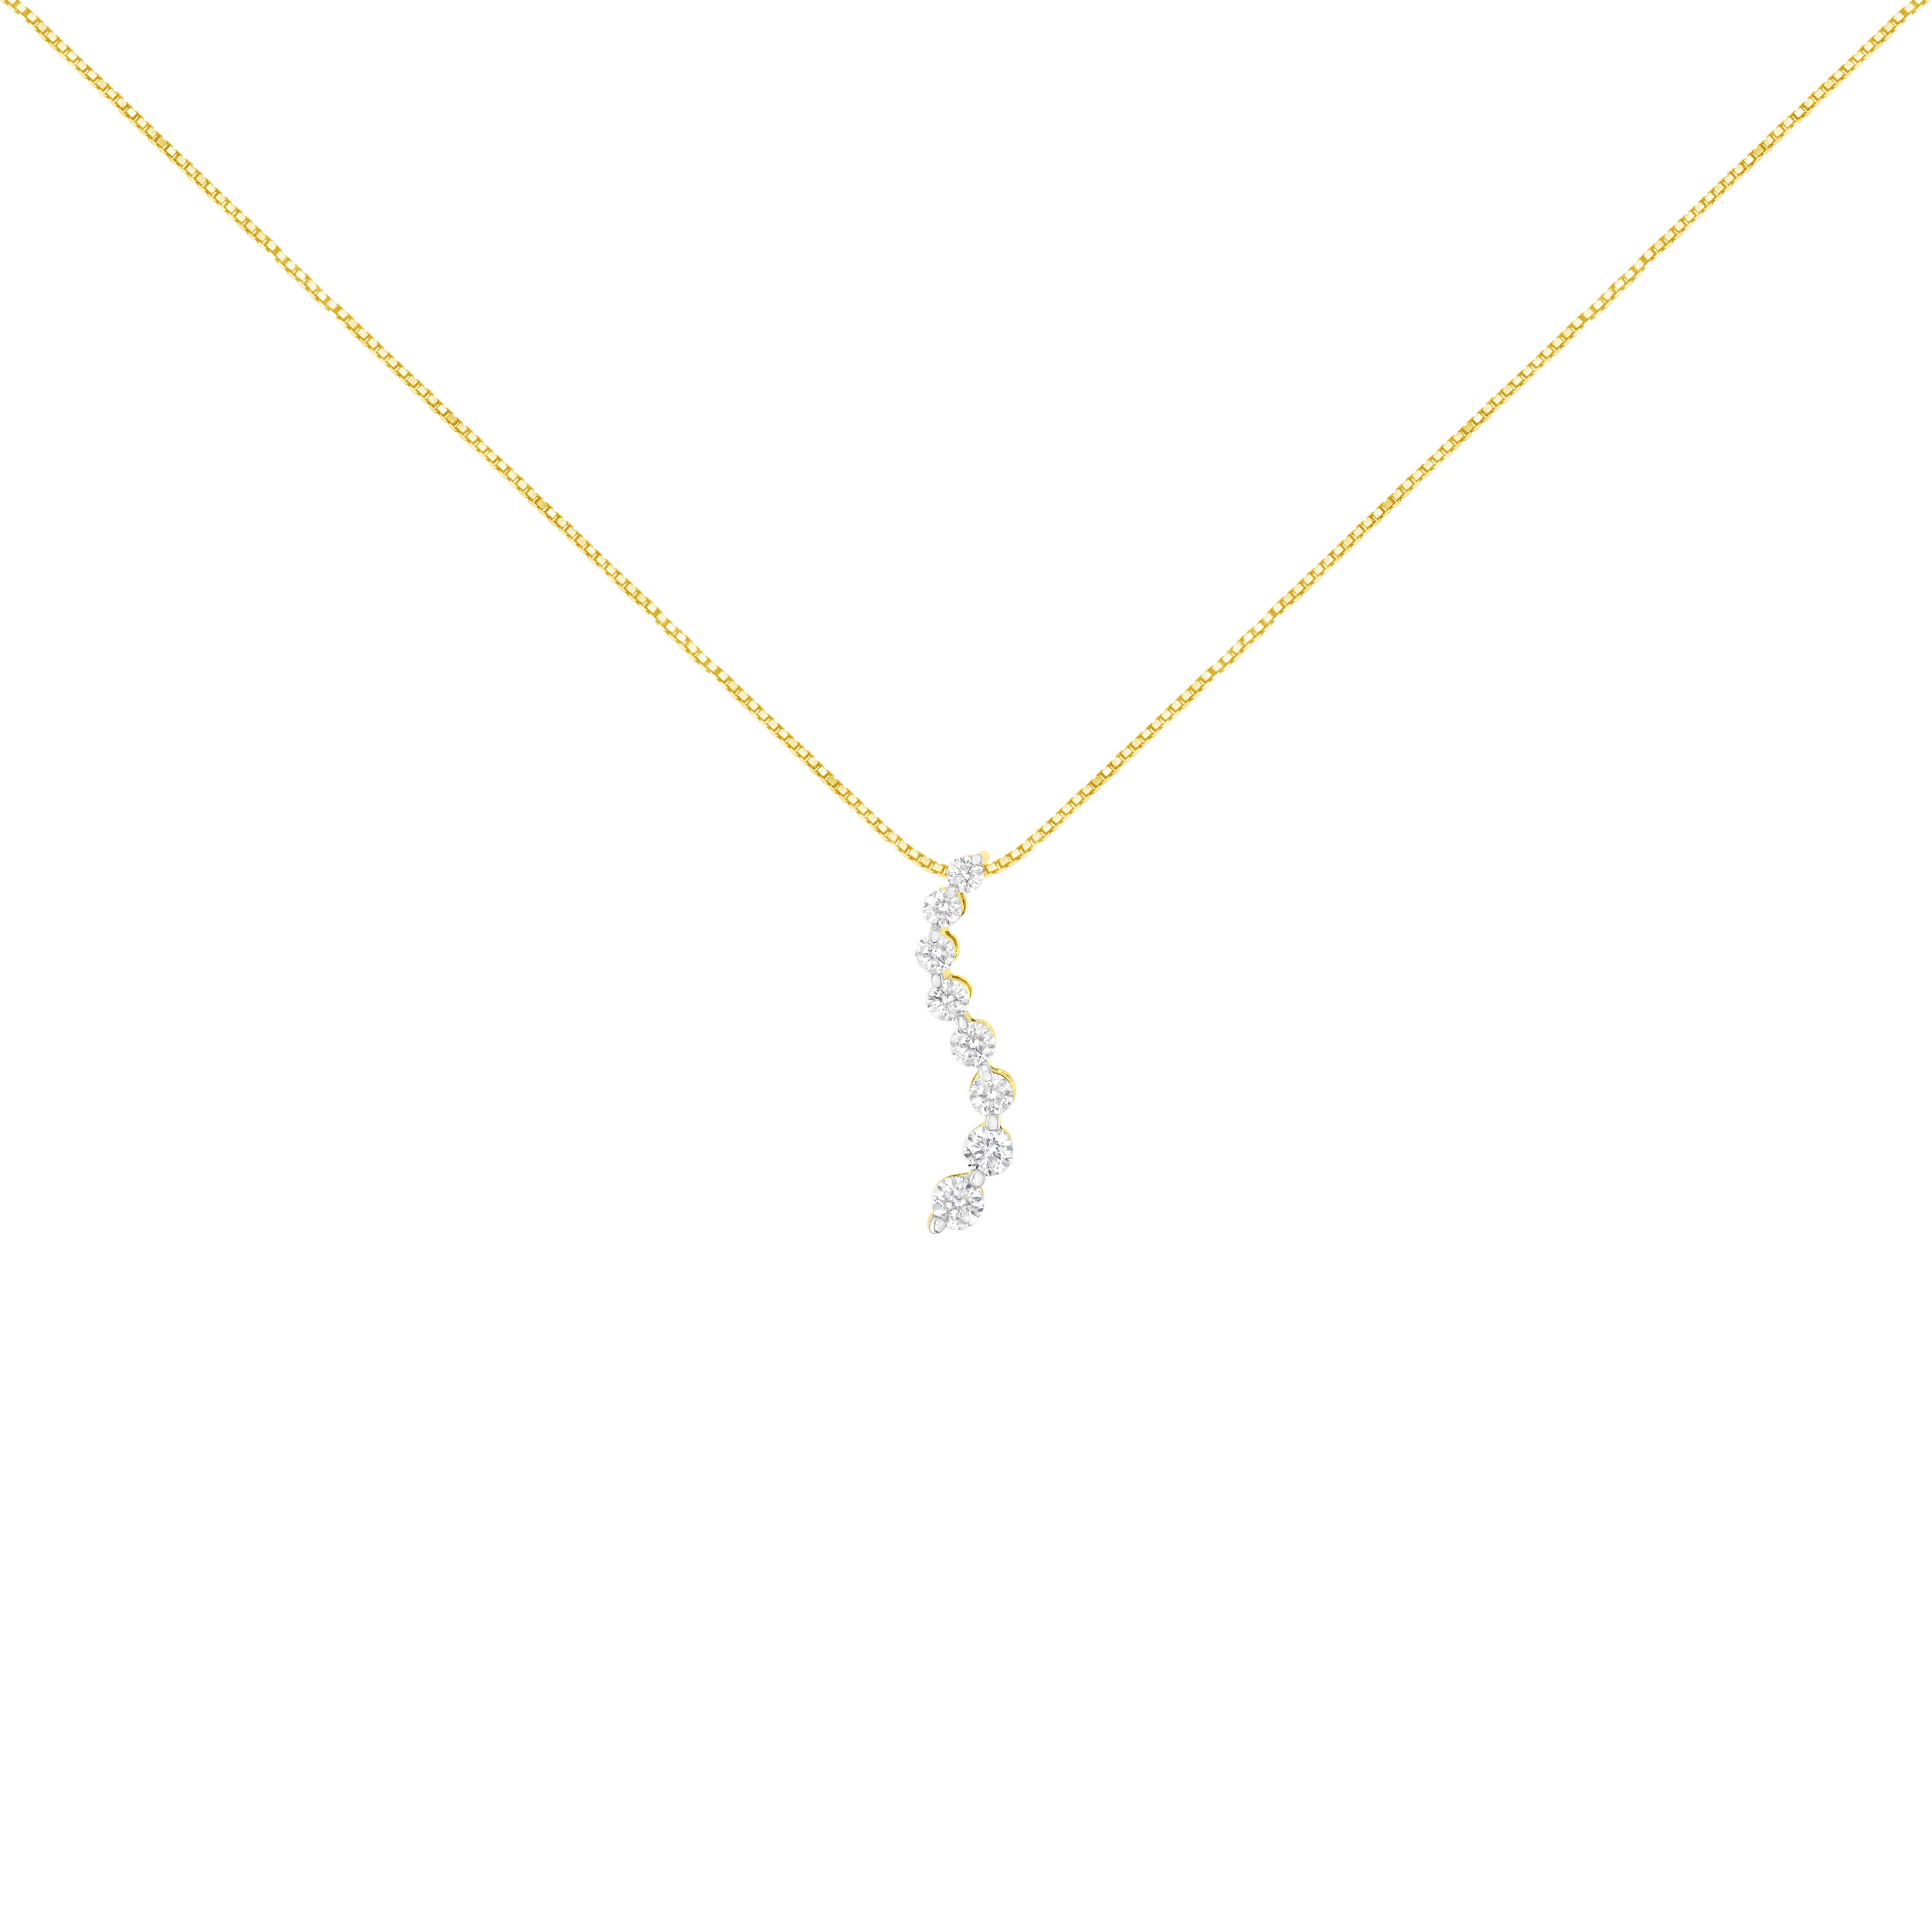 Eight stunning prong set round cut diamonds create a soft wave in this 14k yellow gold journey pendant. Baguette cut diamonds are set into the sides of the pendant giving it an unexpected design element that adds shimmer and elegance to this piece.